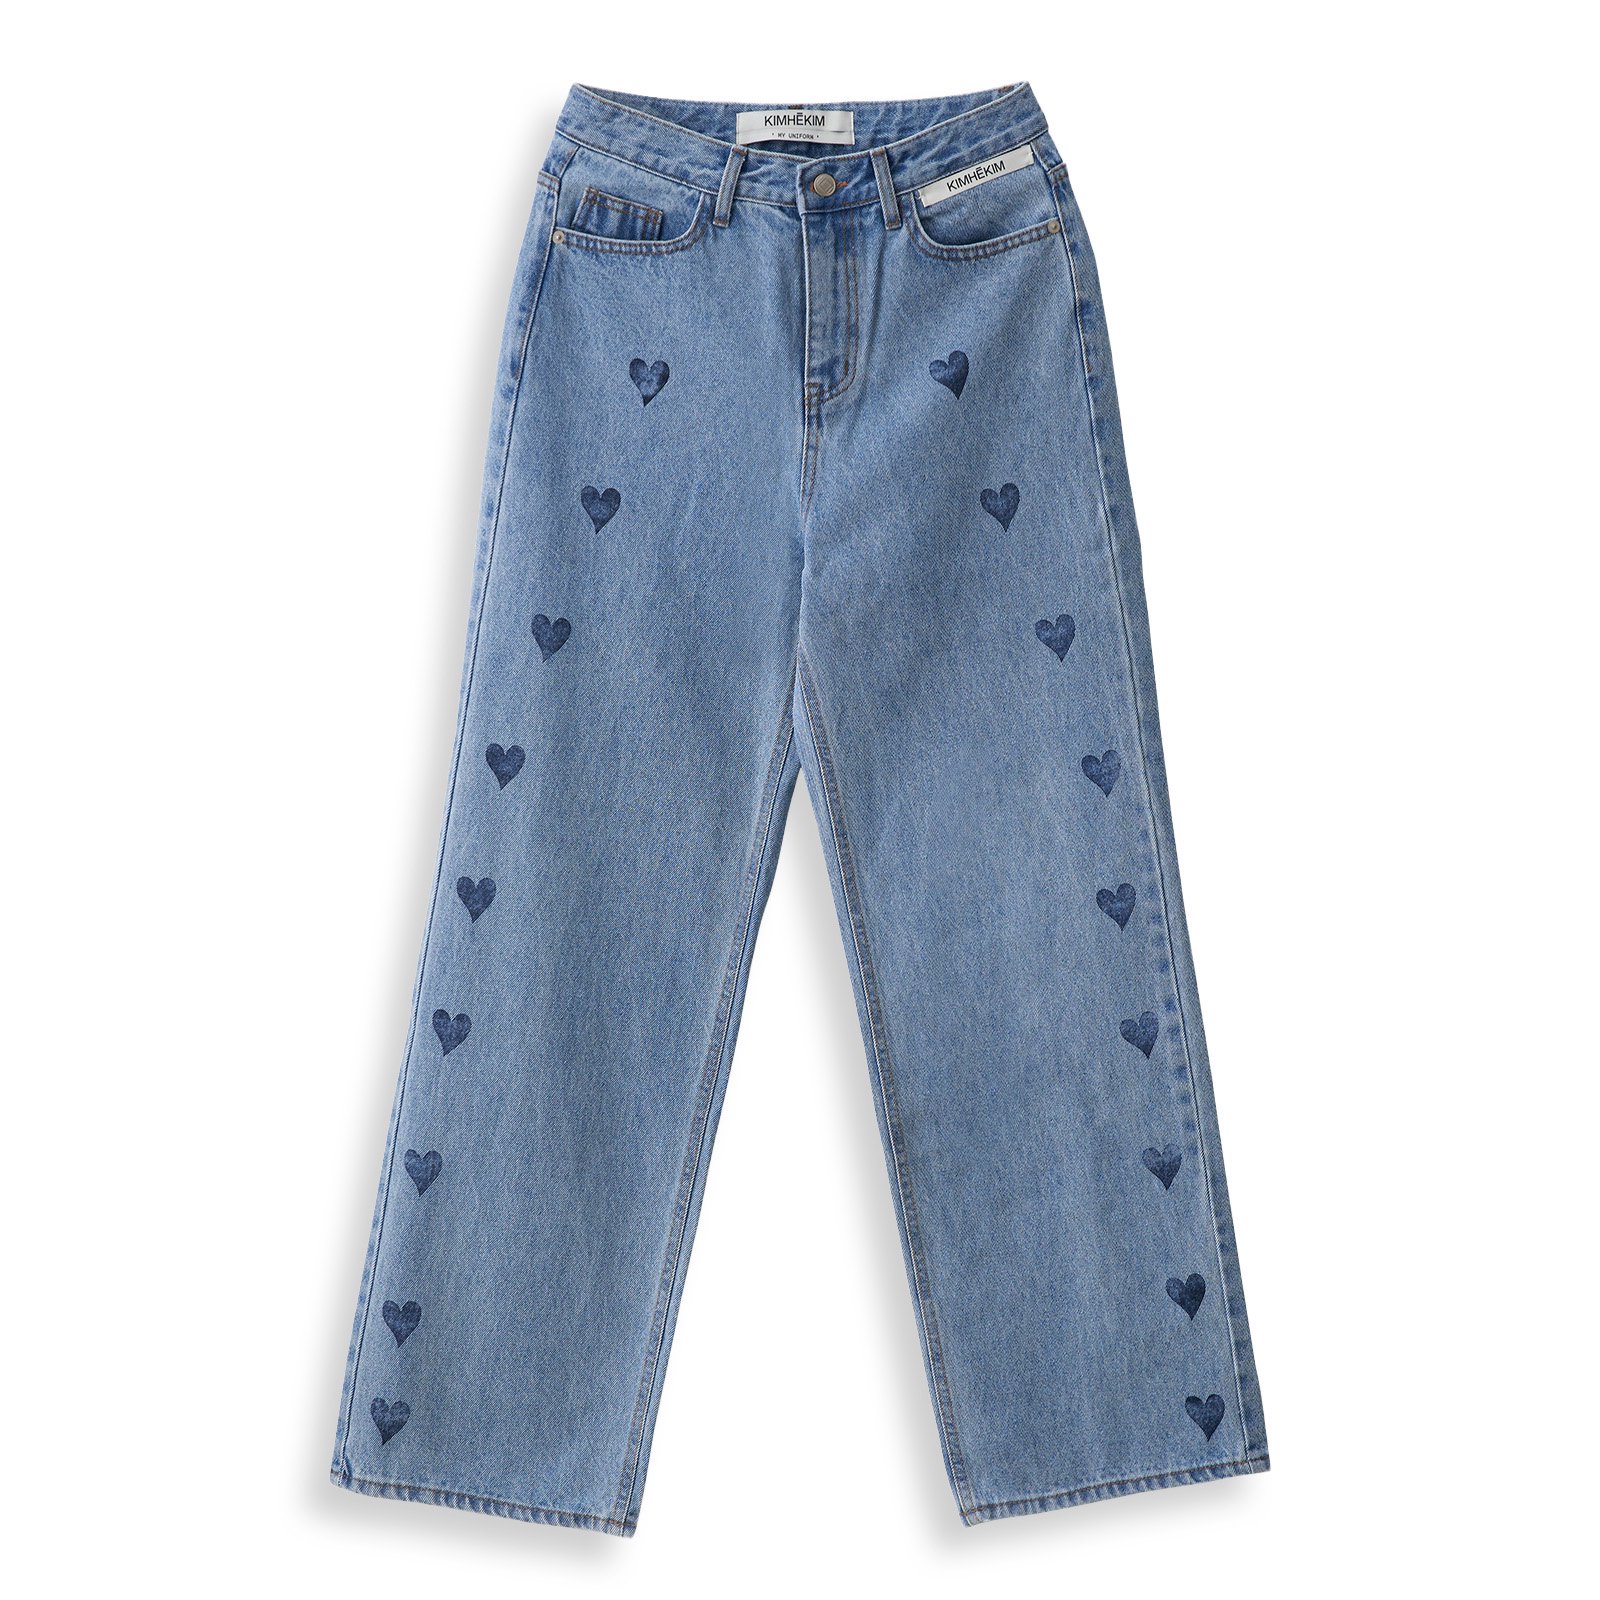 <img class='new_mark_img1' src='https://img.shop-pro.jp/img/new/icons47.gif' style='border:none;display:inline;margin:0px;padding:0px;width:auto;' />KIMHEKIM HEART STAMPED JEANS